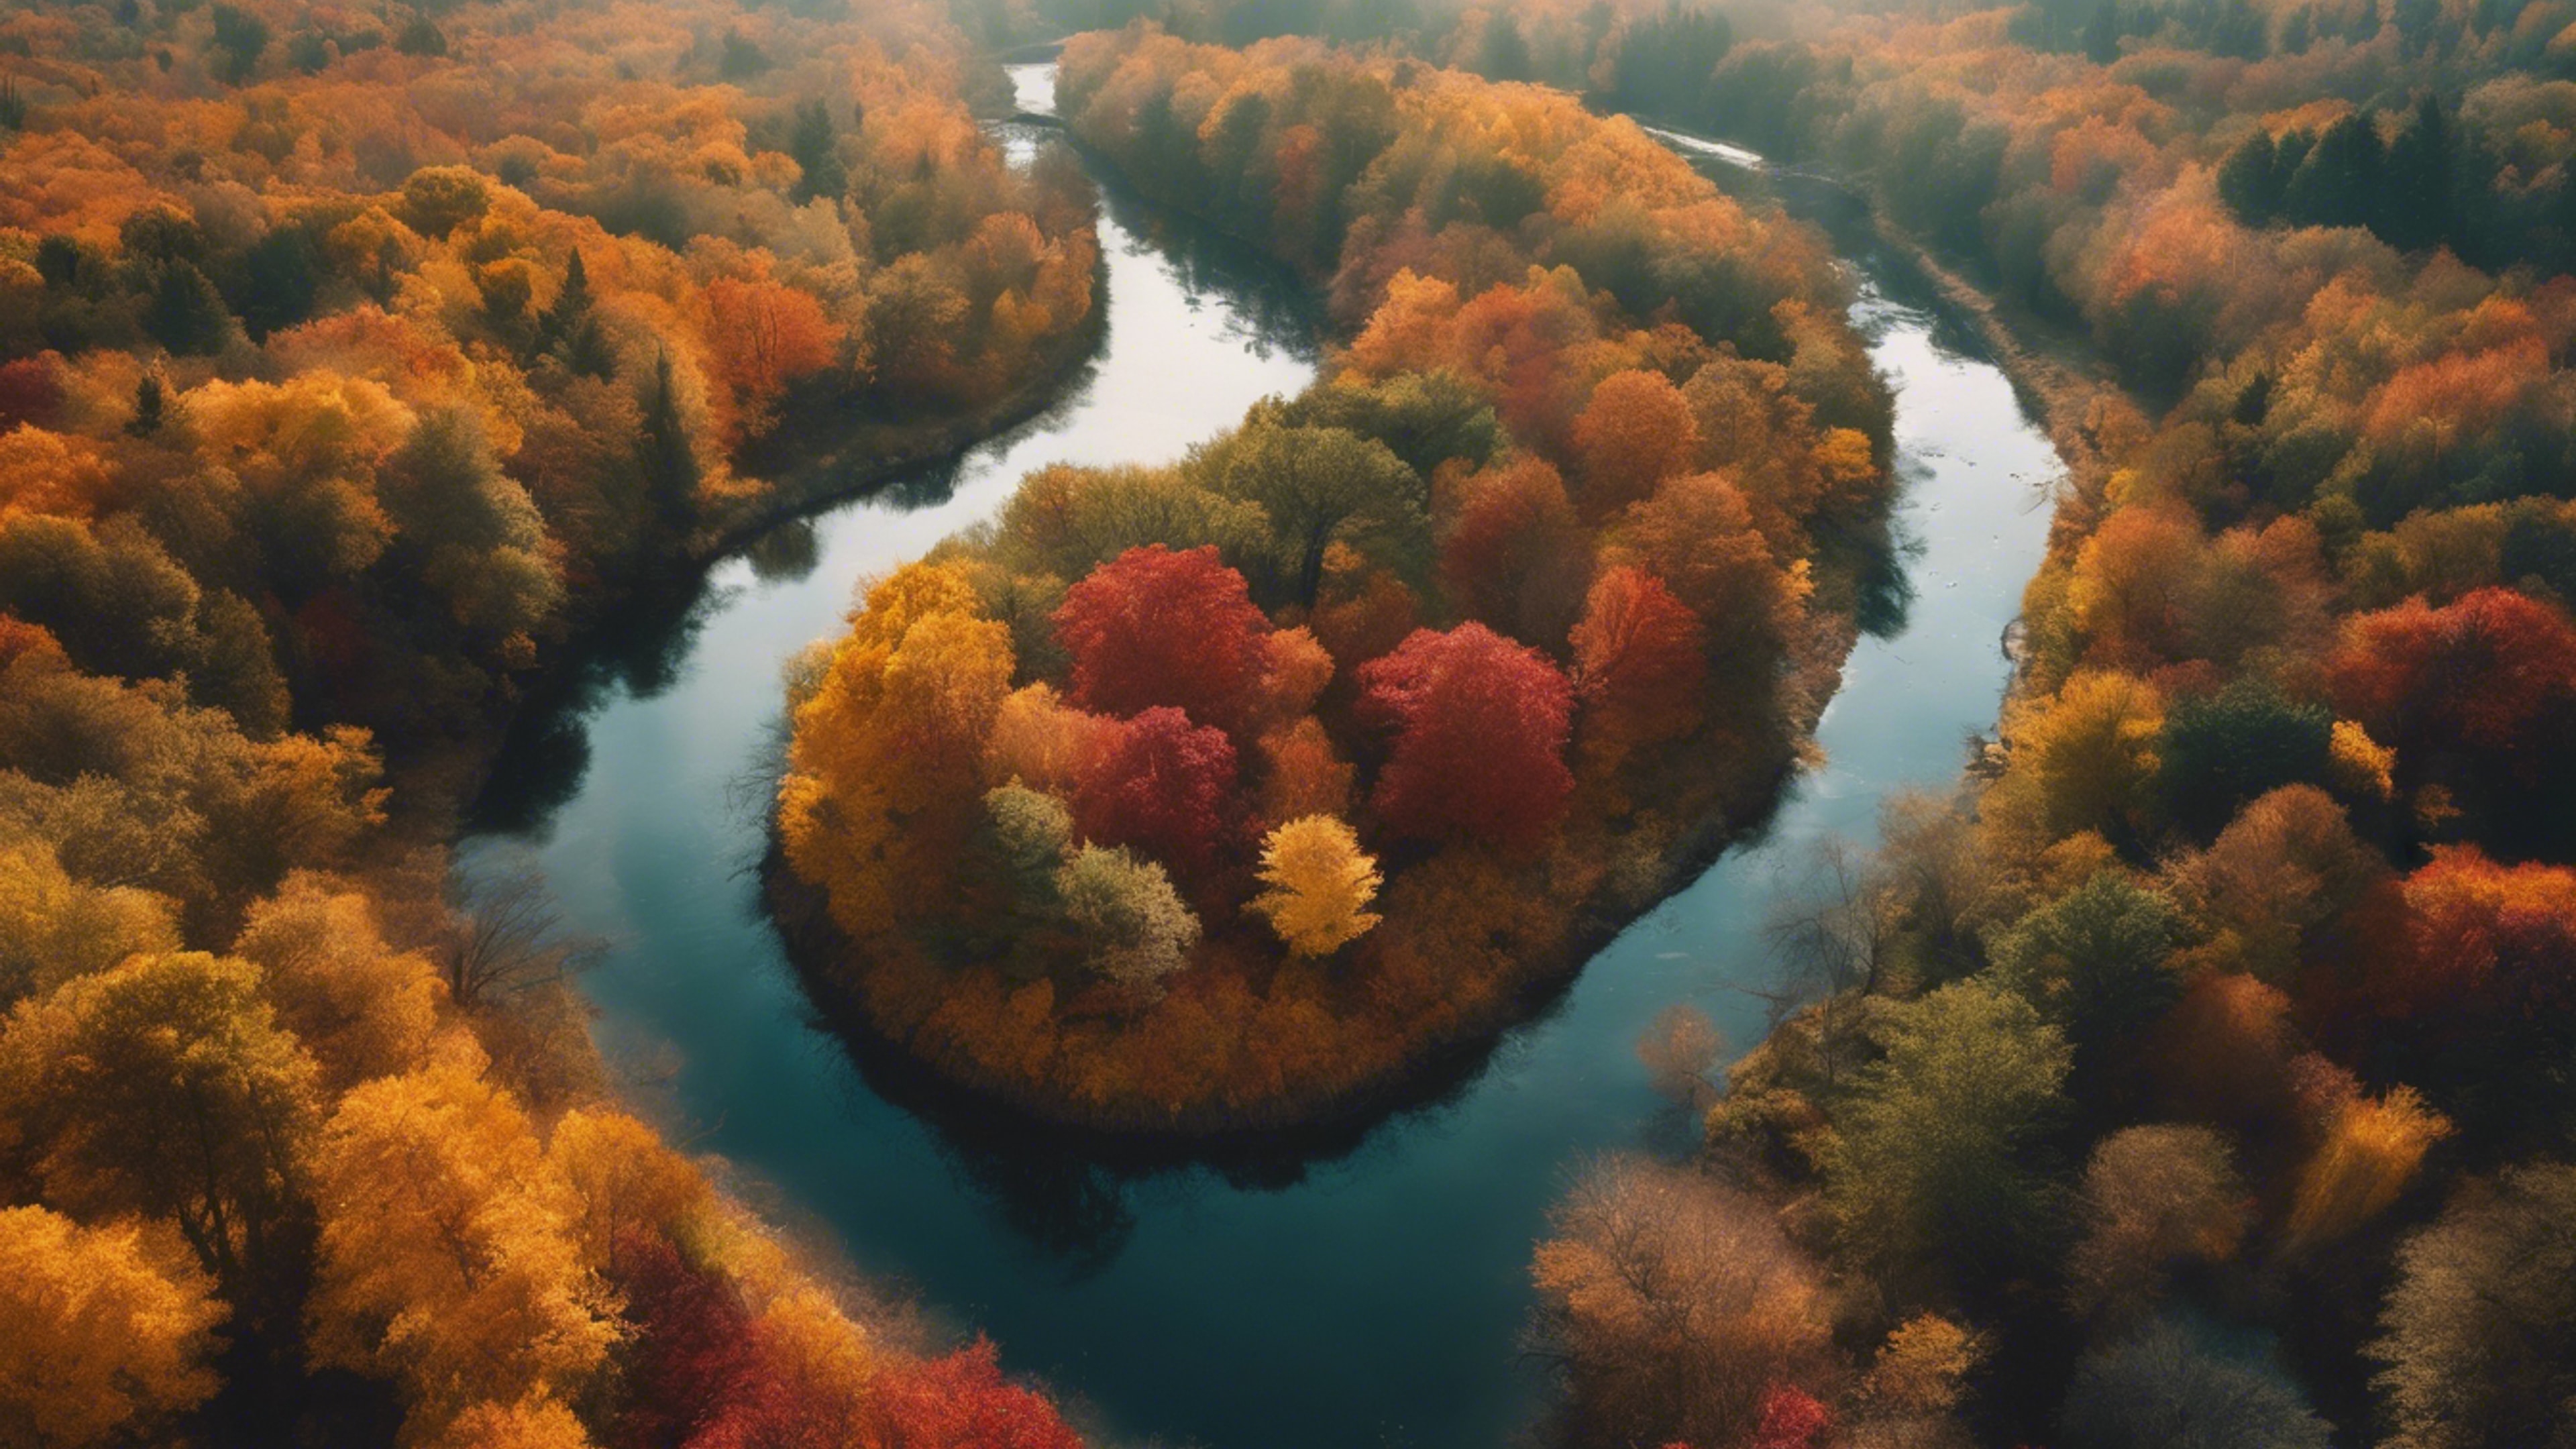 An overhead shot of a winding river, its banks adorned with trees showcasing an explosion of fall colors.壁紙[2a848fa5d1d344a79639]